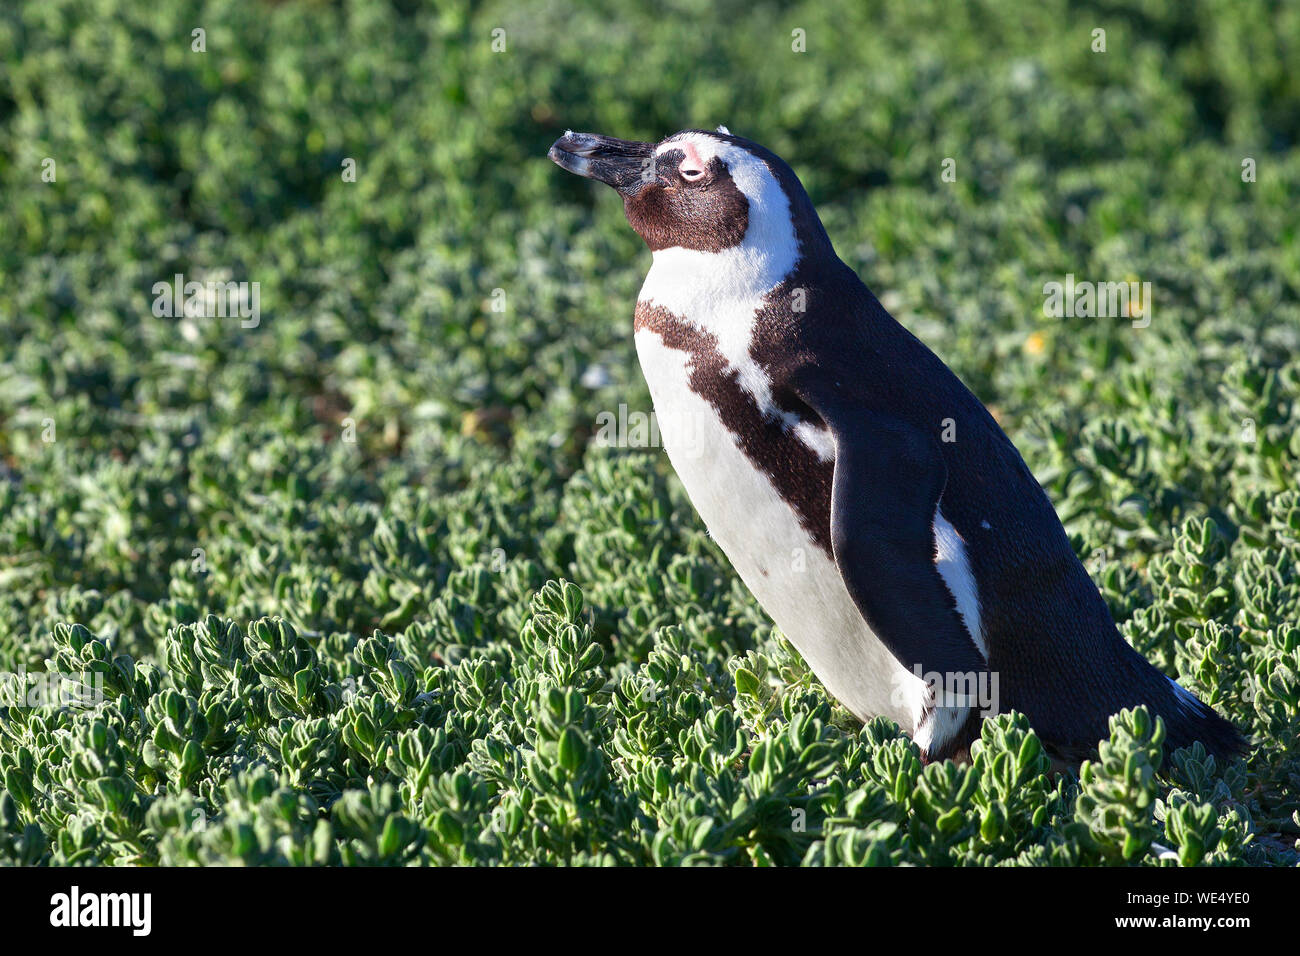 African spheniscus penguin on green grass background in sunny day close up, South Africa coast Stock Photo